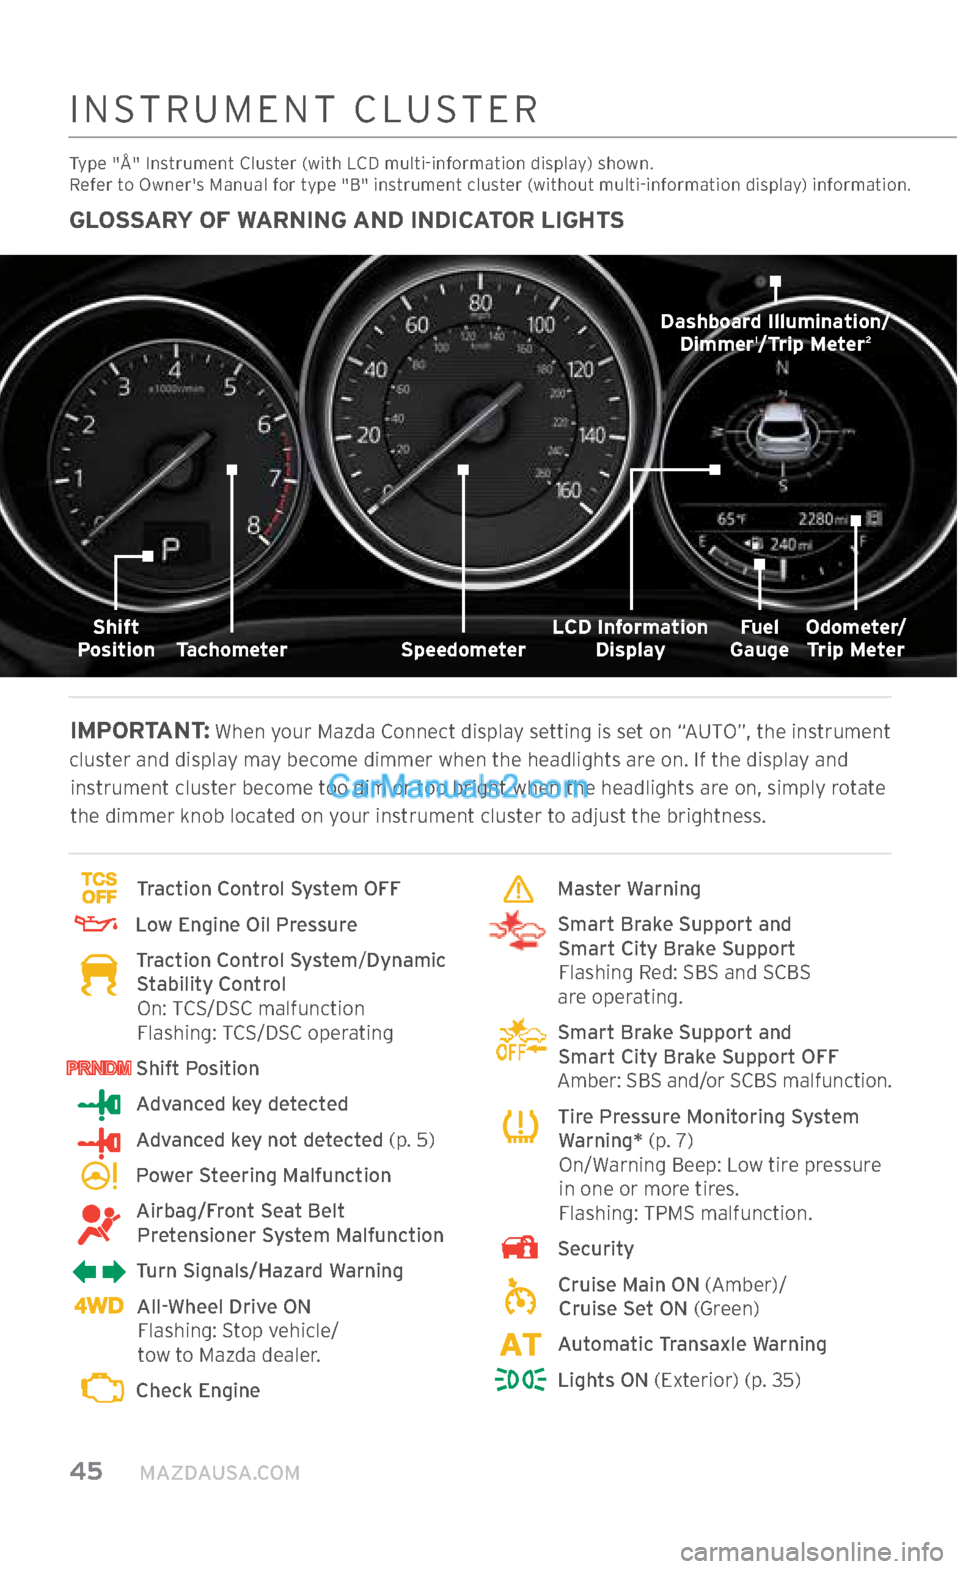 MAZDA MODEL CX-5 2017  Smart Start Guide (in English) 45     MAZDAUSA.COM
GLOSSARY OF WARNING AND INDICATOR LIGHTS
IMPORTANT:
  When your Mazda Connect display setting is set on “AUTO”, the instrument 
cluster and display may become dimmer when the h